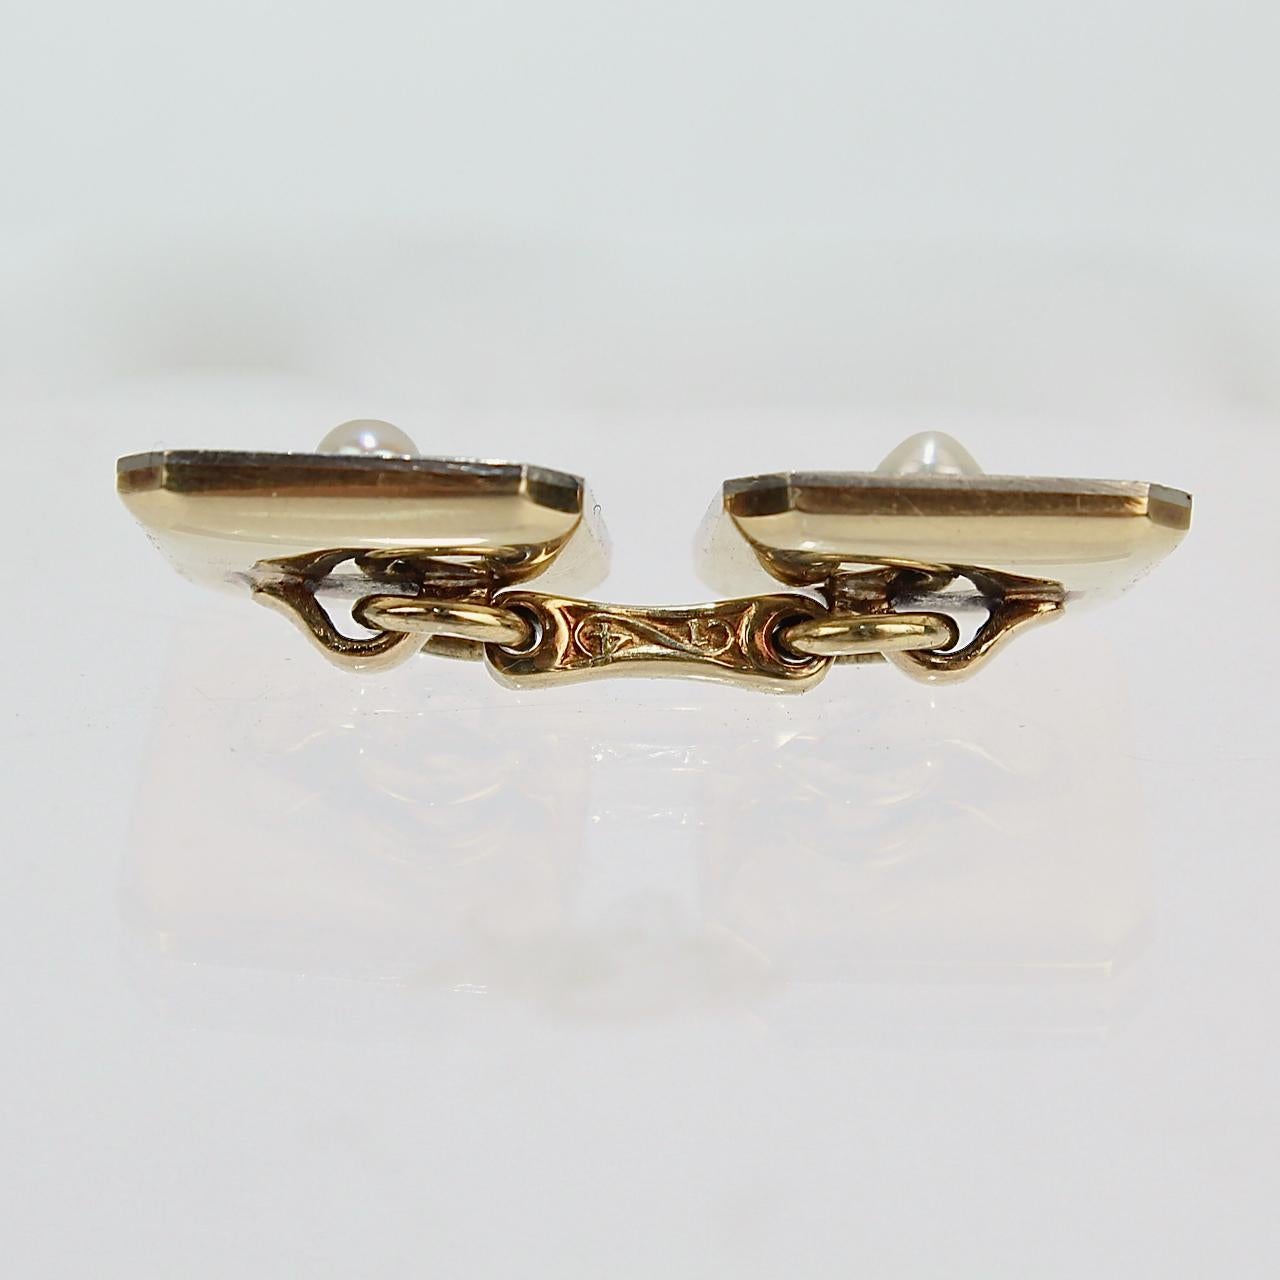 Tiffany & Co Art Deco Cufflink Dress Set in 14K Gold & Platinum with Seed Pearls 7